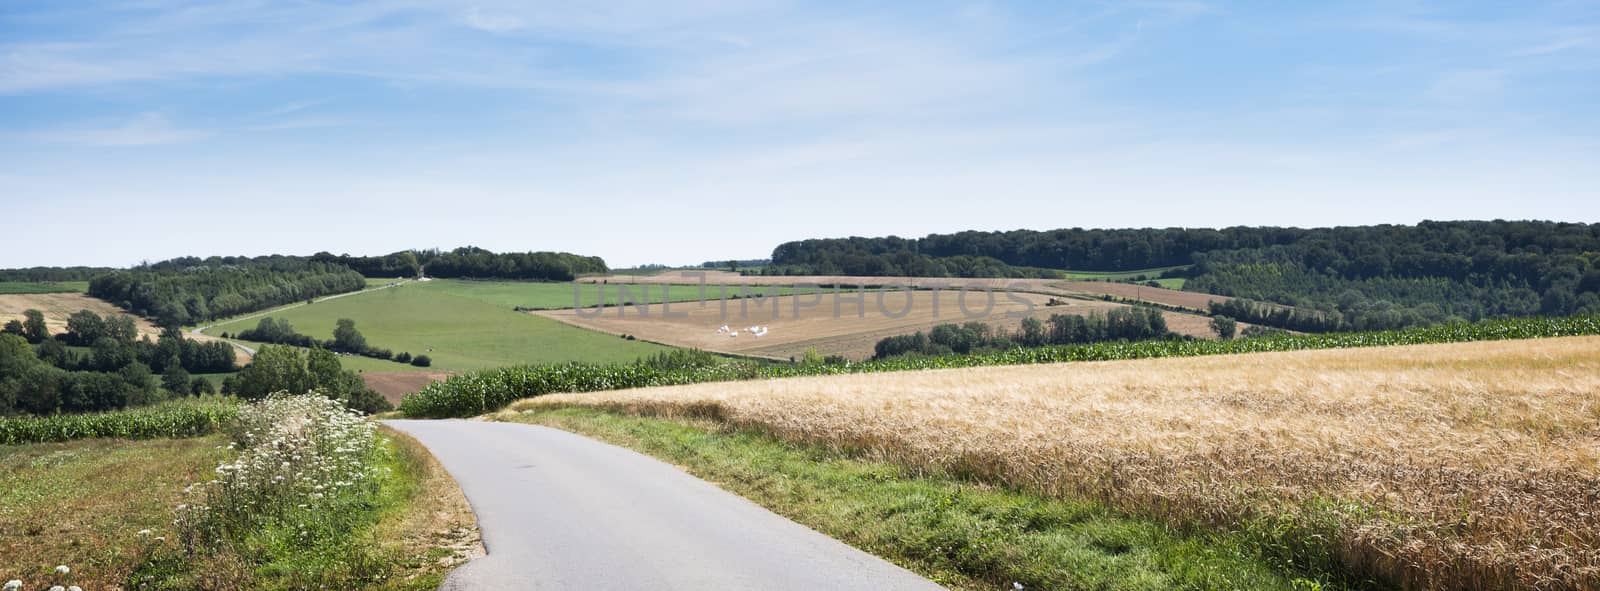 cornfields and meadows under blue sky in french pas de calais near boulogne in summer